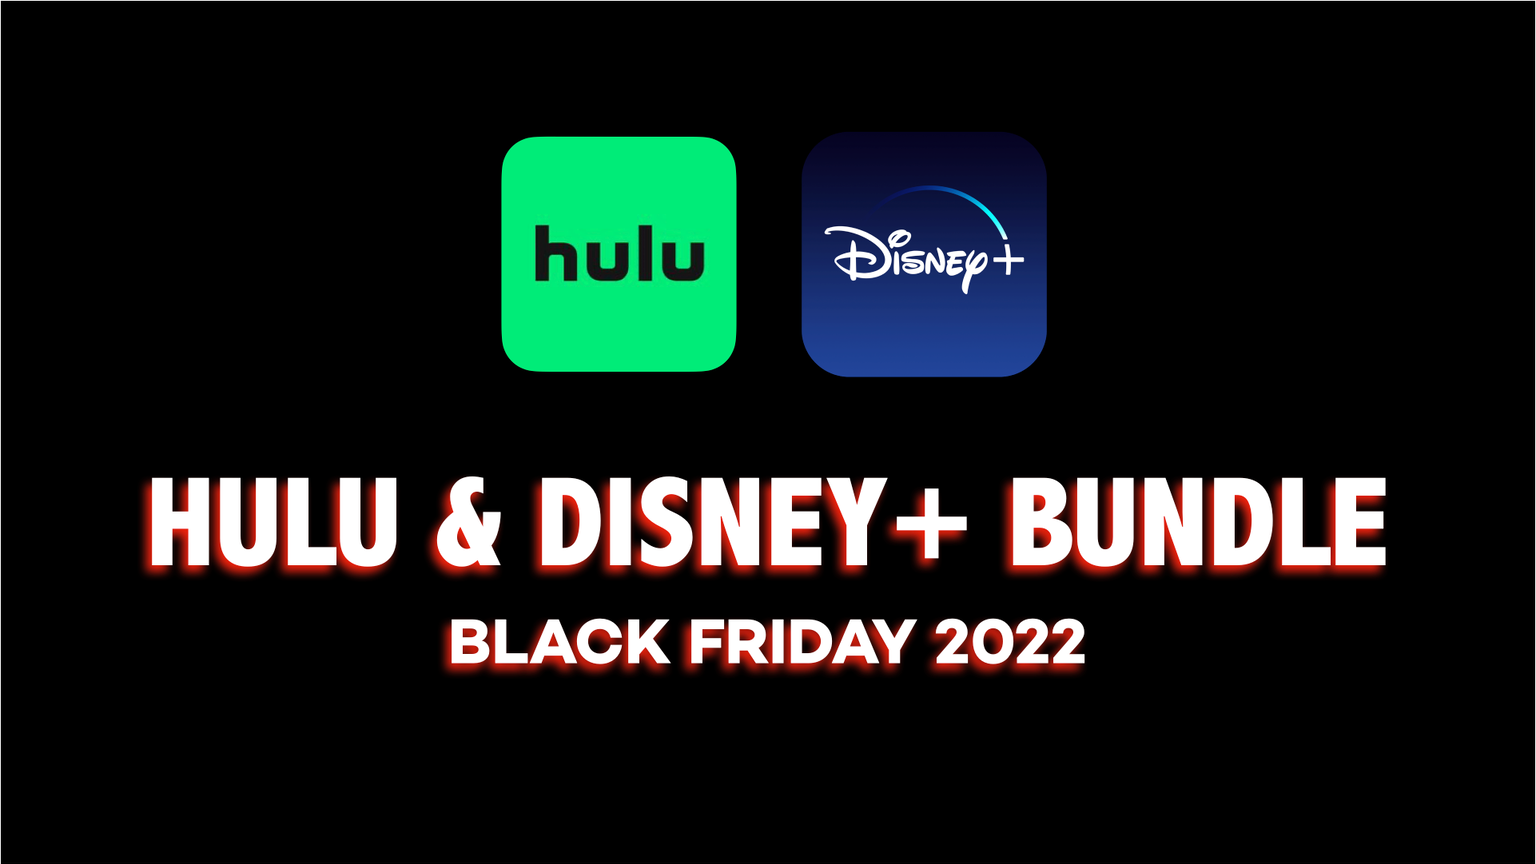 Disney+ Black Friday Deal Get Hulu & Disney+ For 4.98 a Month For The